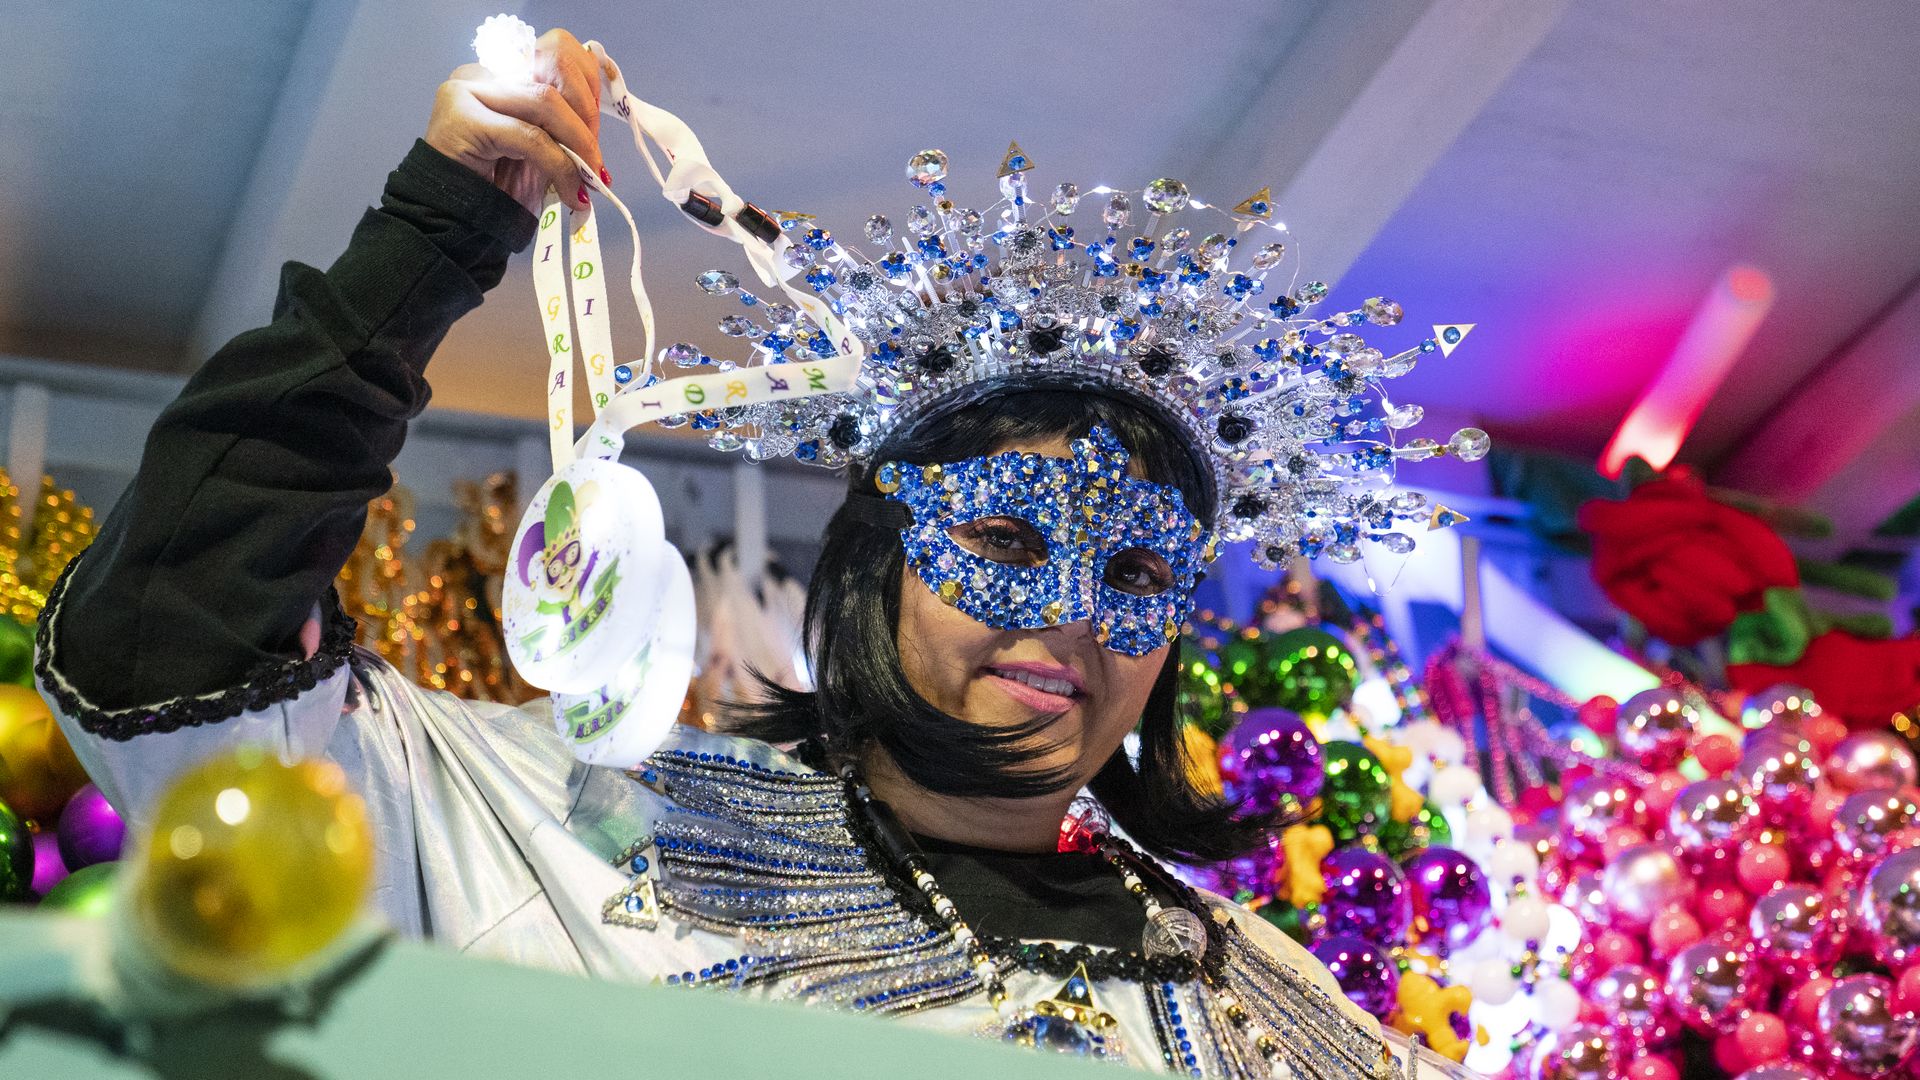 A parade rider, wearing a mask and a decorative headband, tosses beads to a crowd, off-camera.